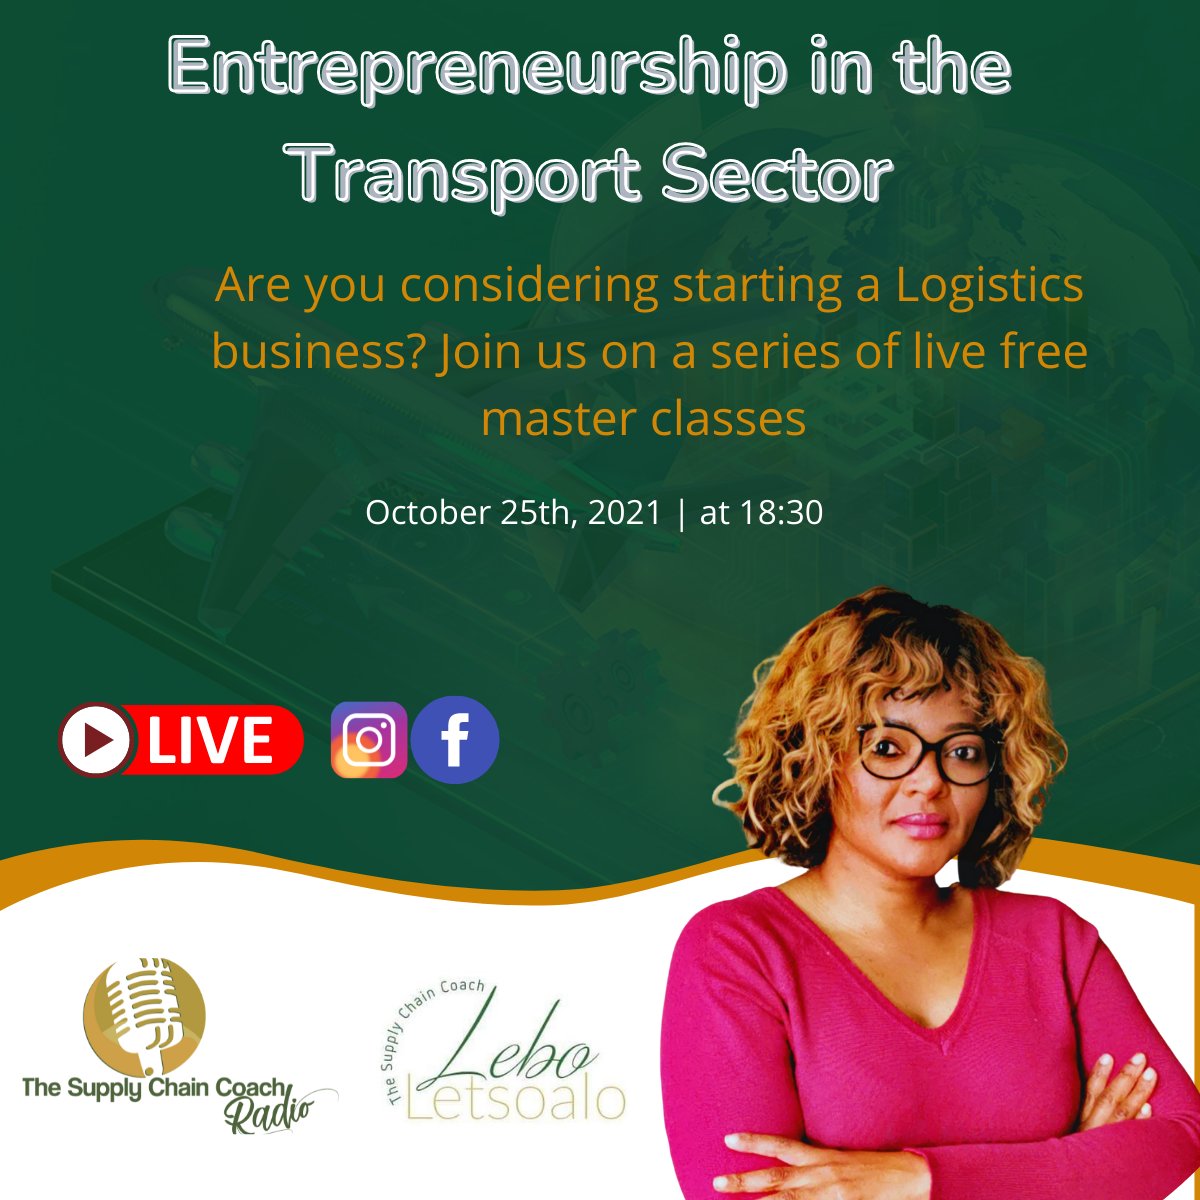 Join me for a free coaching session tonight at 6:30 pm on Instagram to learn about Transport sector. Follow @thesupplychaincoach